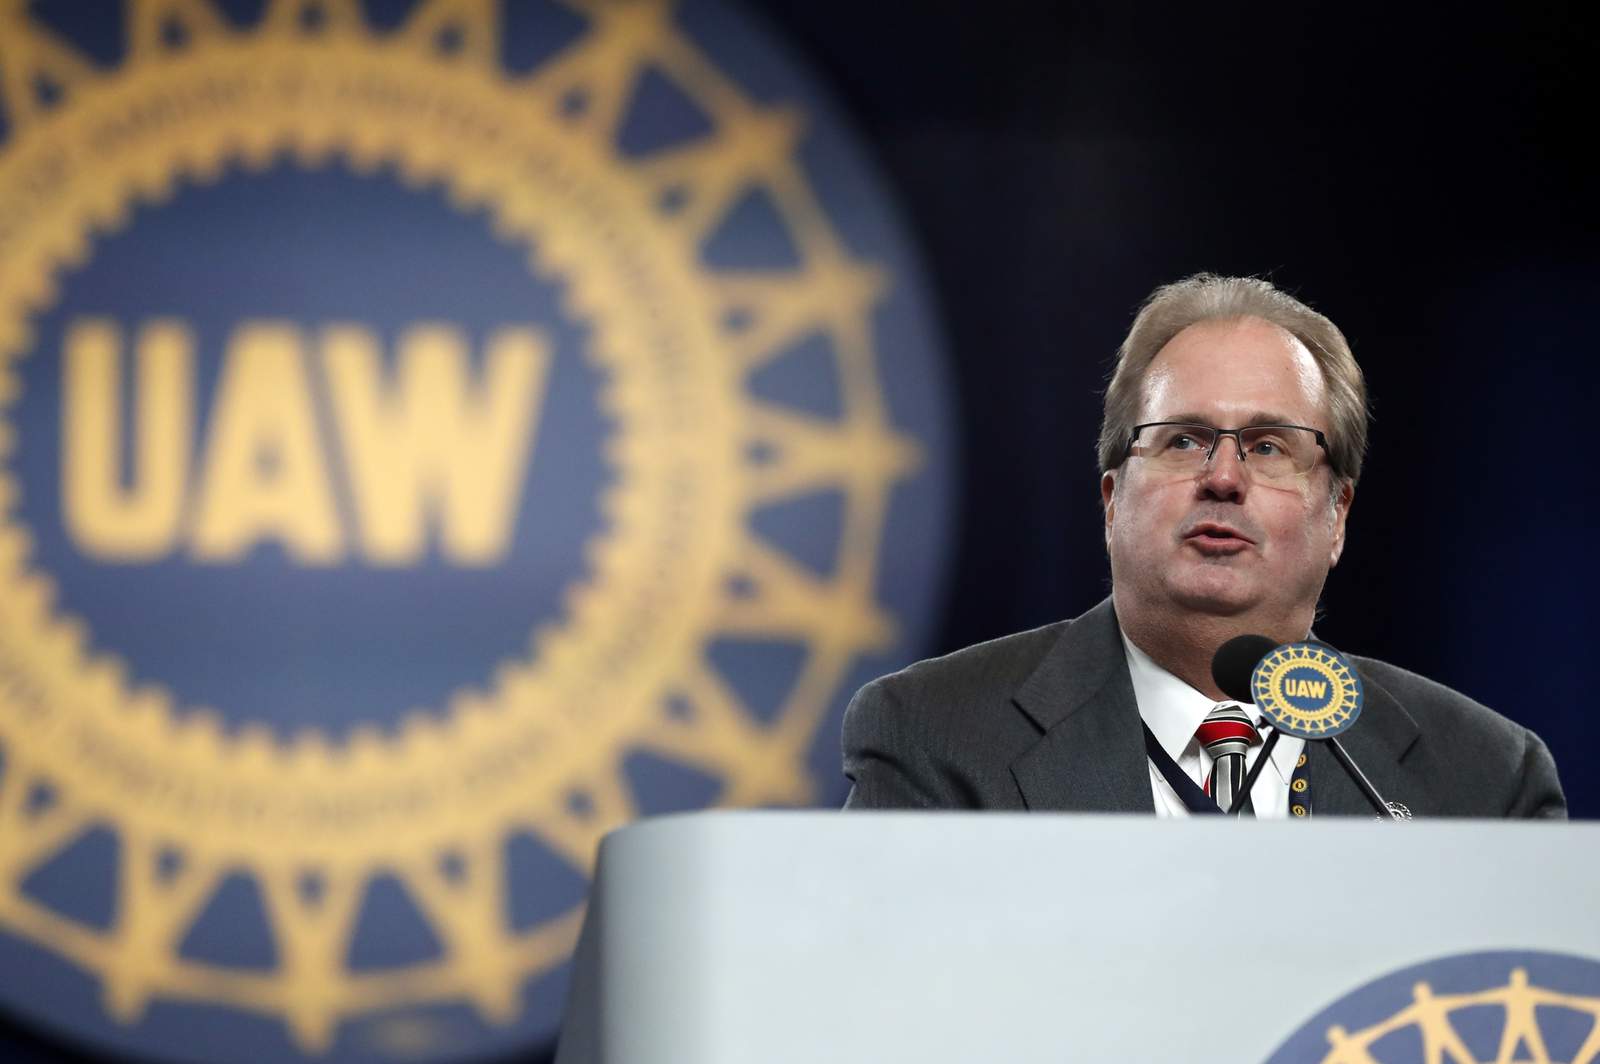 Auto workers chief, prosecutor to discuss reforming union